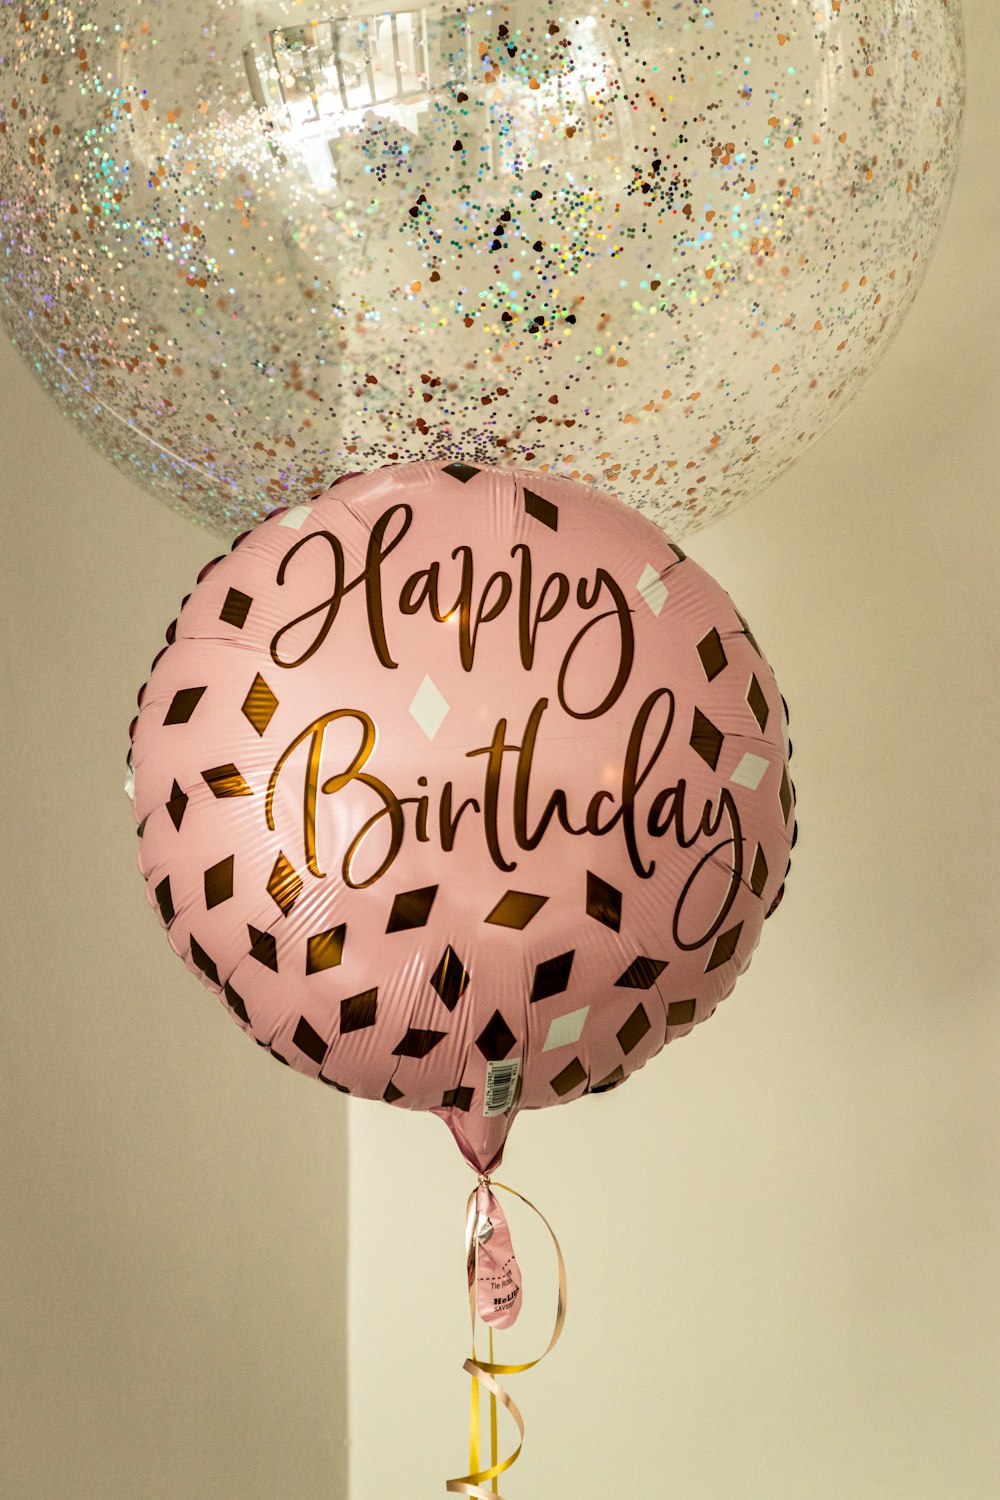 Happy Birthday Balloons Pictures | Download Free Images on Unsplash